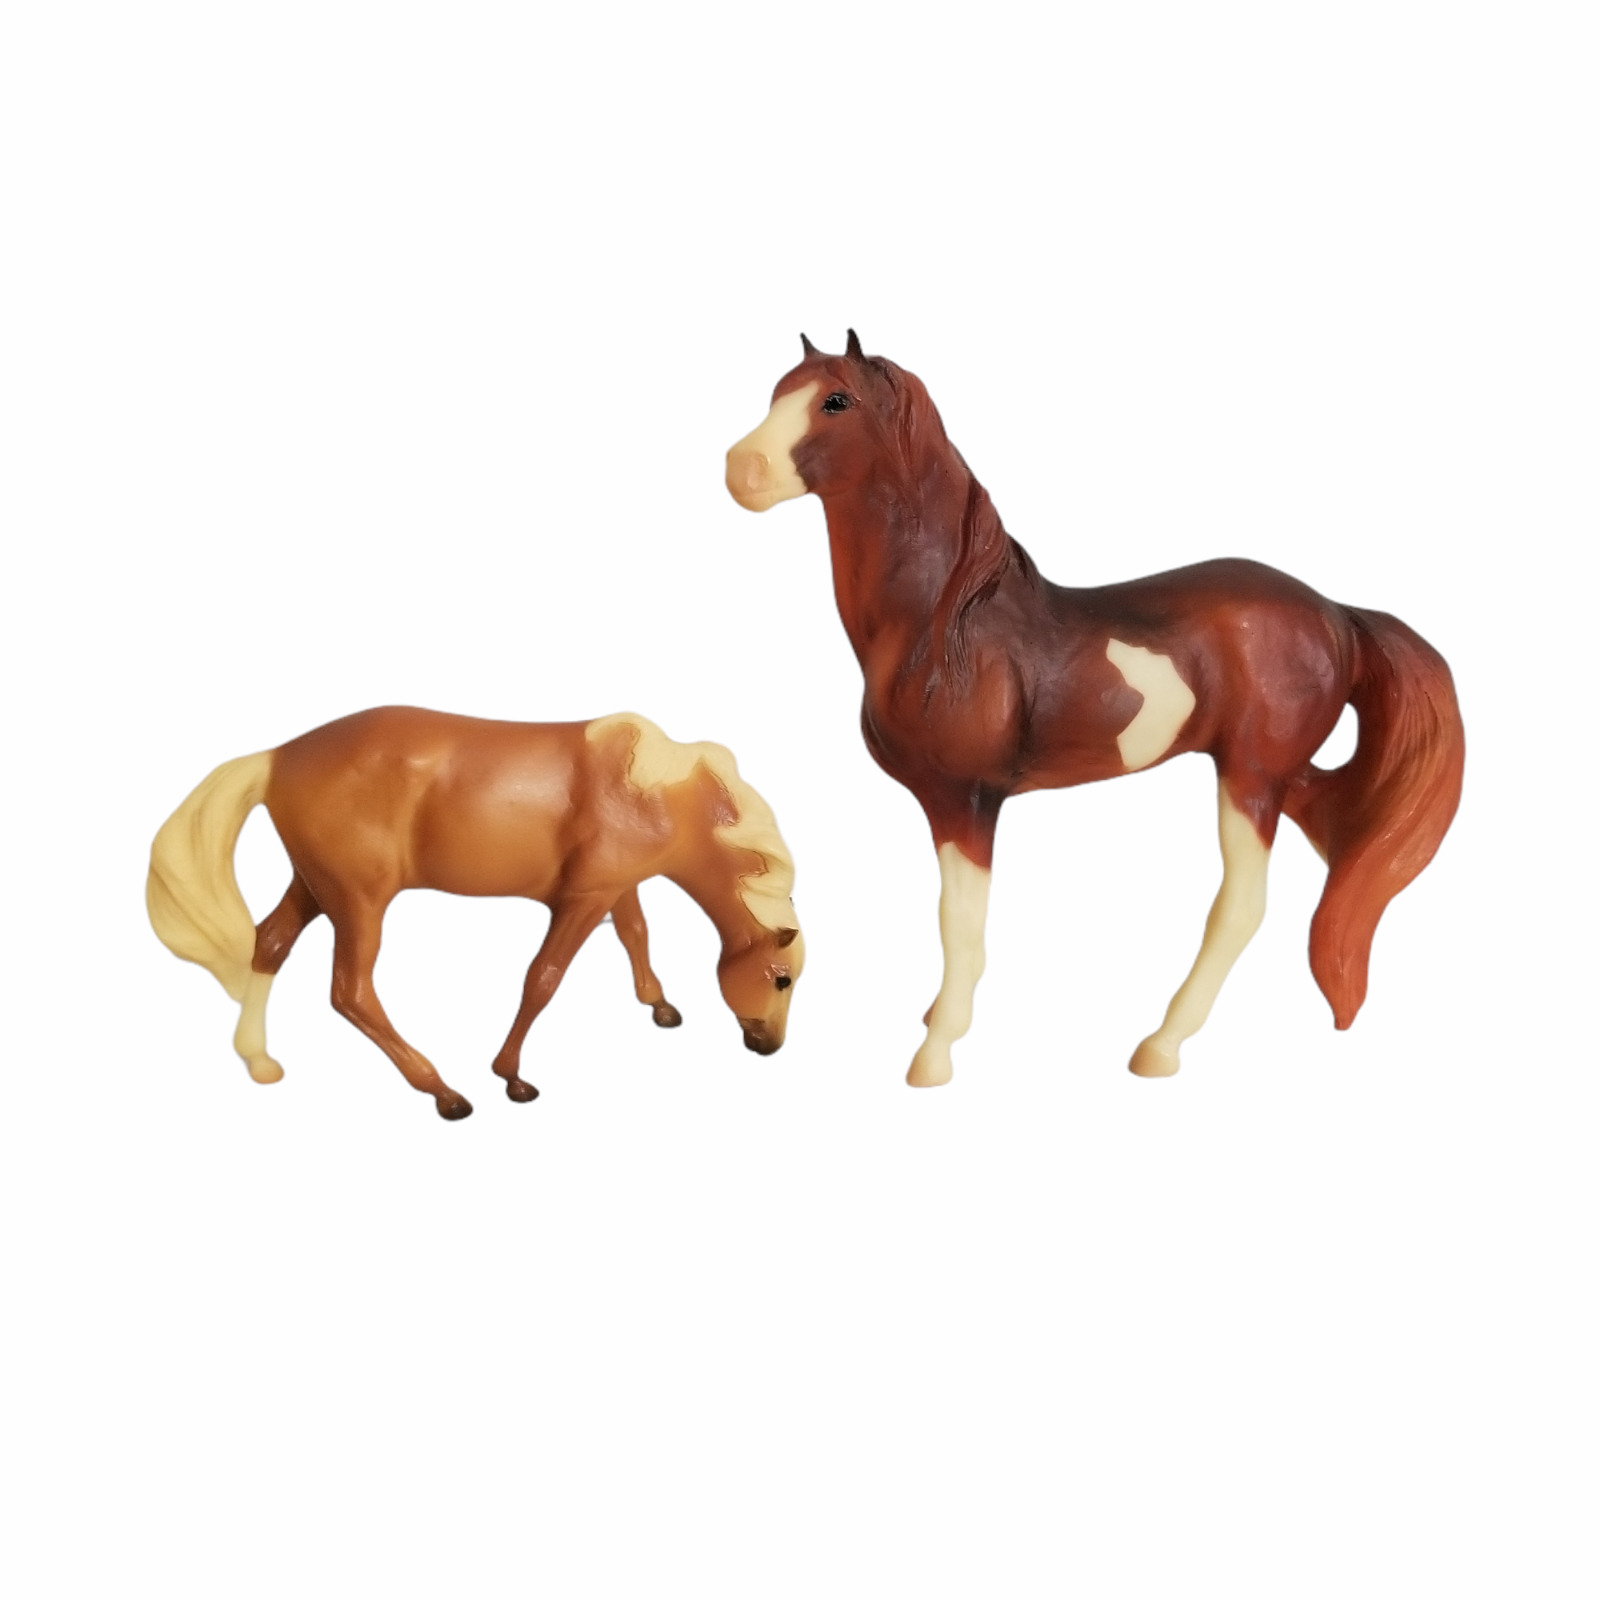 Breyer Reeves Horses Lot Of 2  Measuring 7" X 7 1/2" And 6" X 4" Brown White Tan